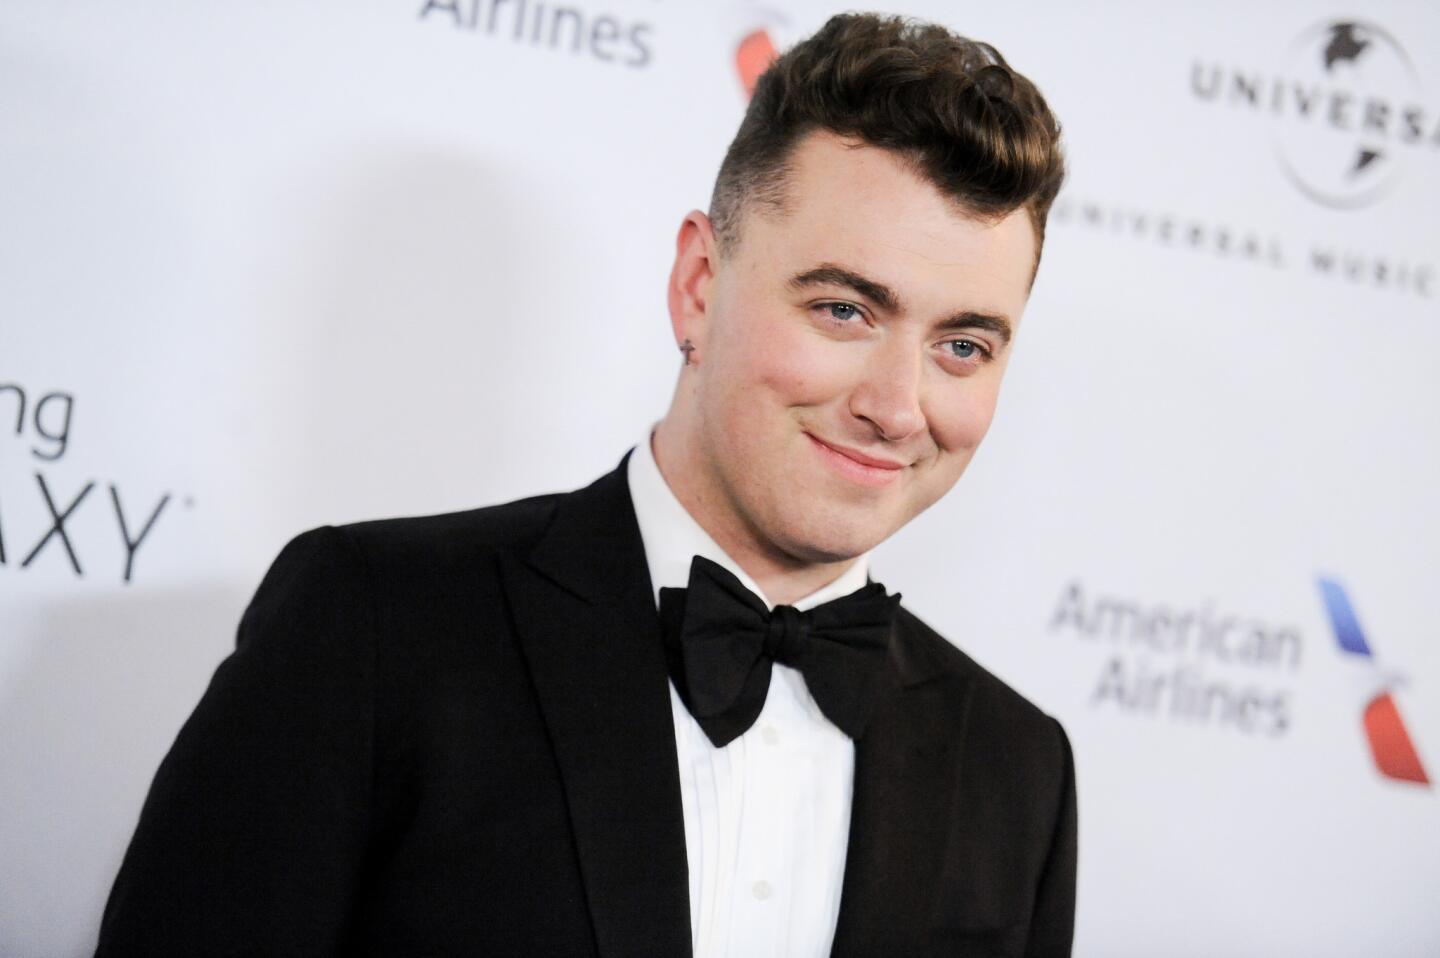 Grammy winner Sam Smith arrives at the Universal Music Group after-party held at the Theatre at Ace Hotel following the 57th Grammy Awards.